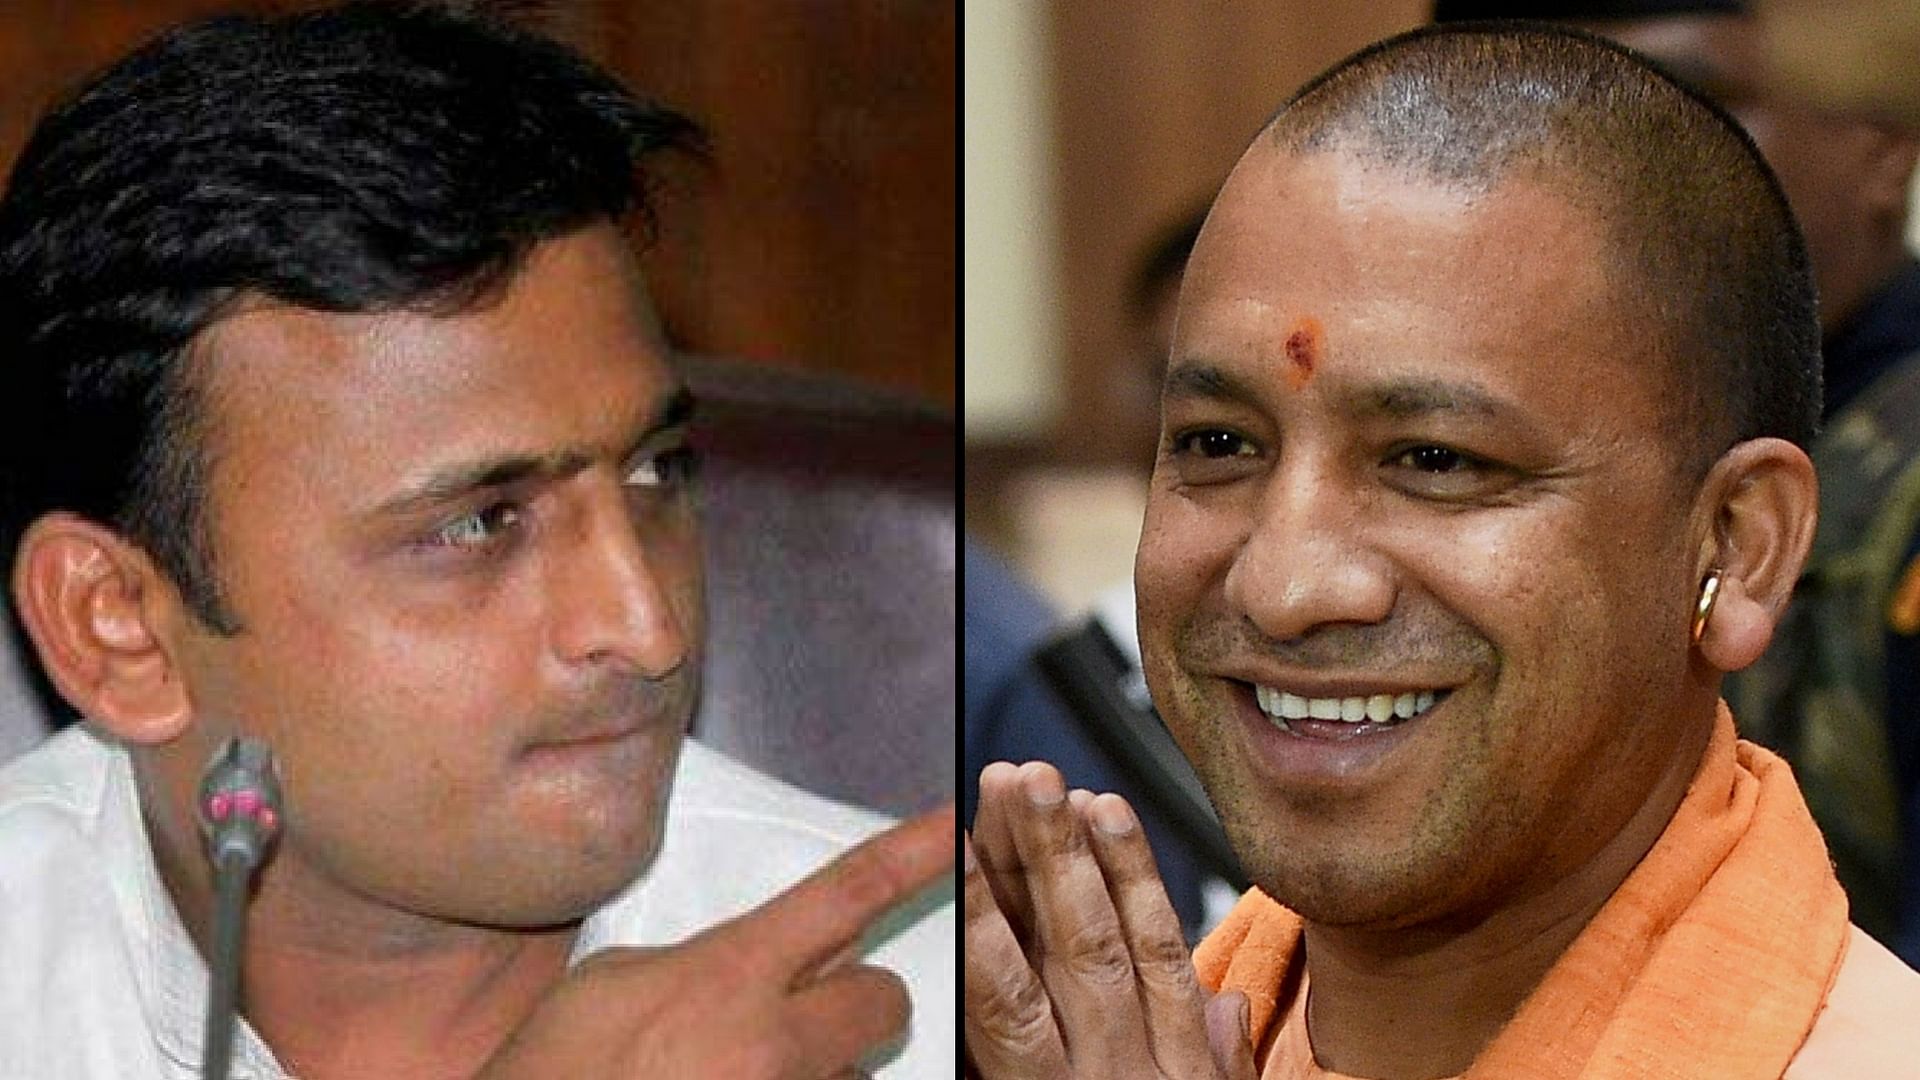 Former (left) and current (right) UP CMs Akhilesh Yadav and Yogi Adityanath. (Photo: <b>The Quint</b>)